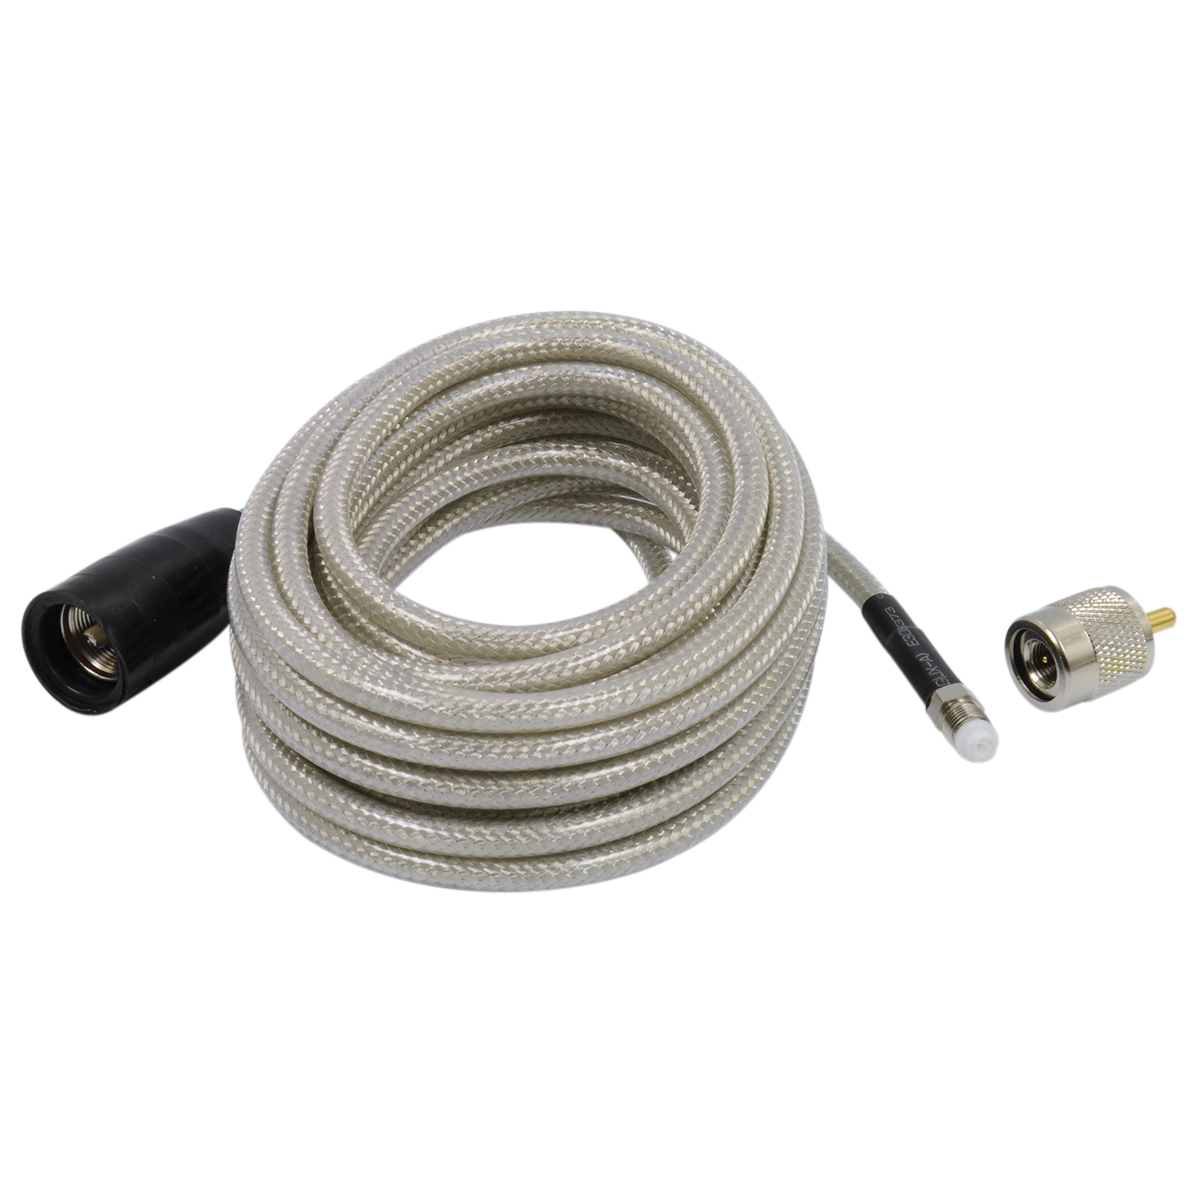 18ft Coax Cable with PL-259 Connectors